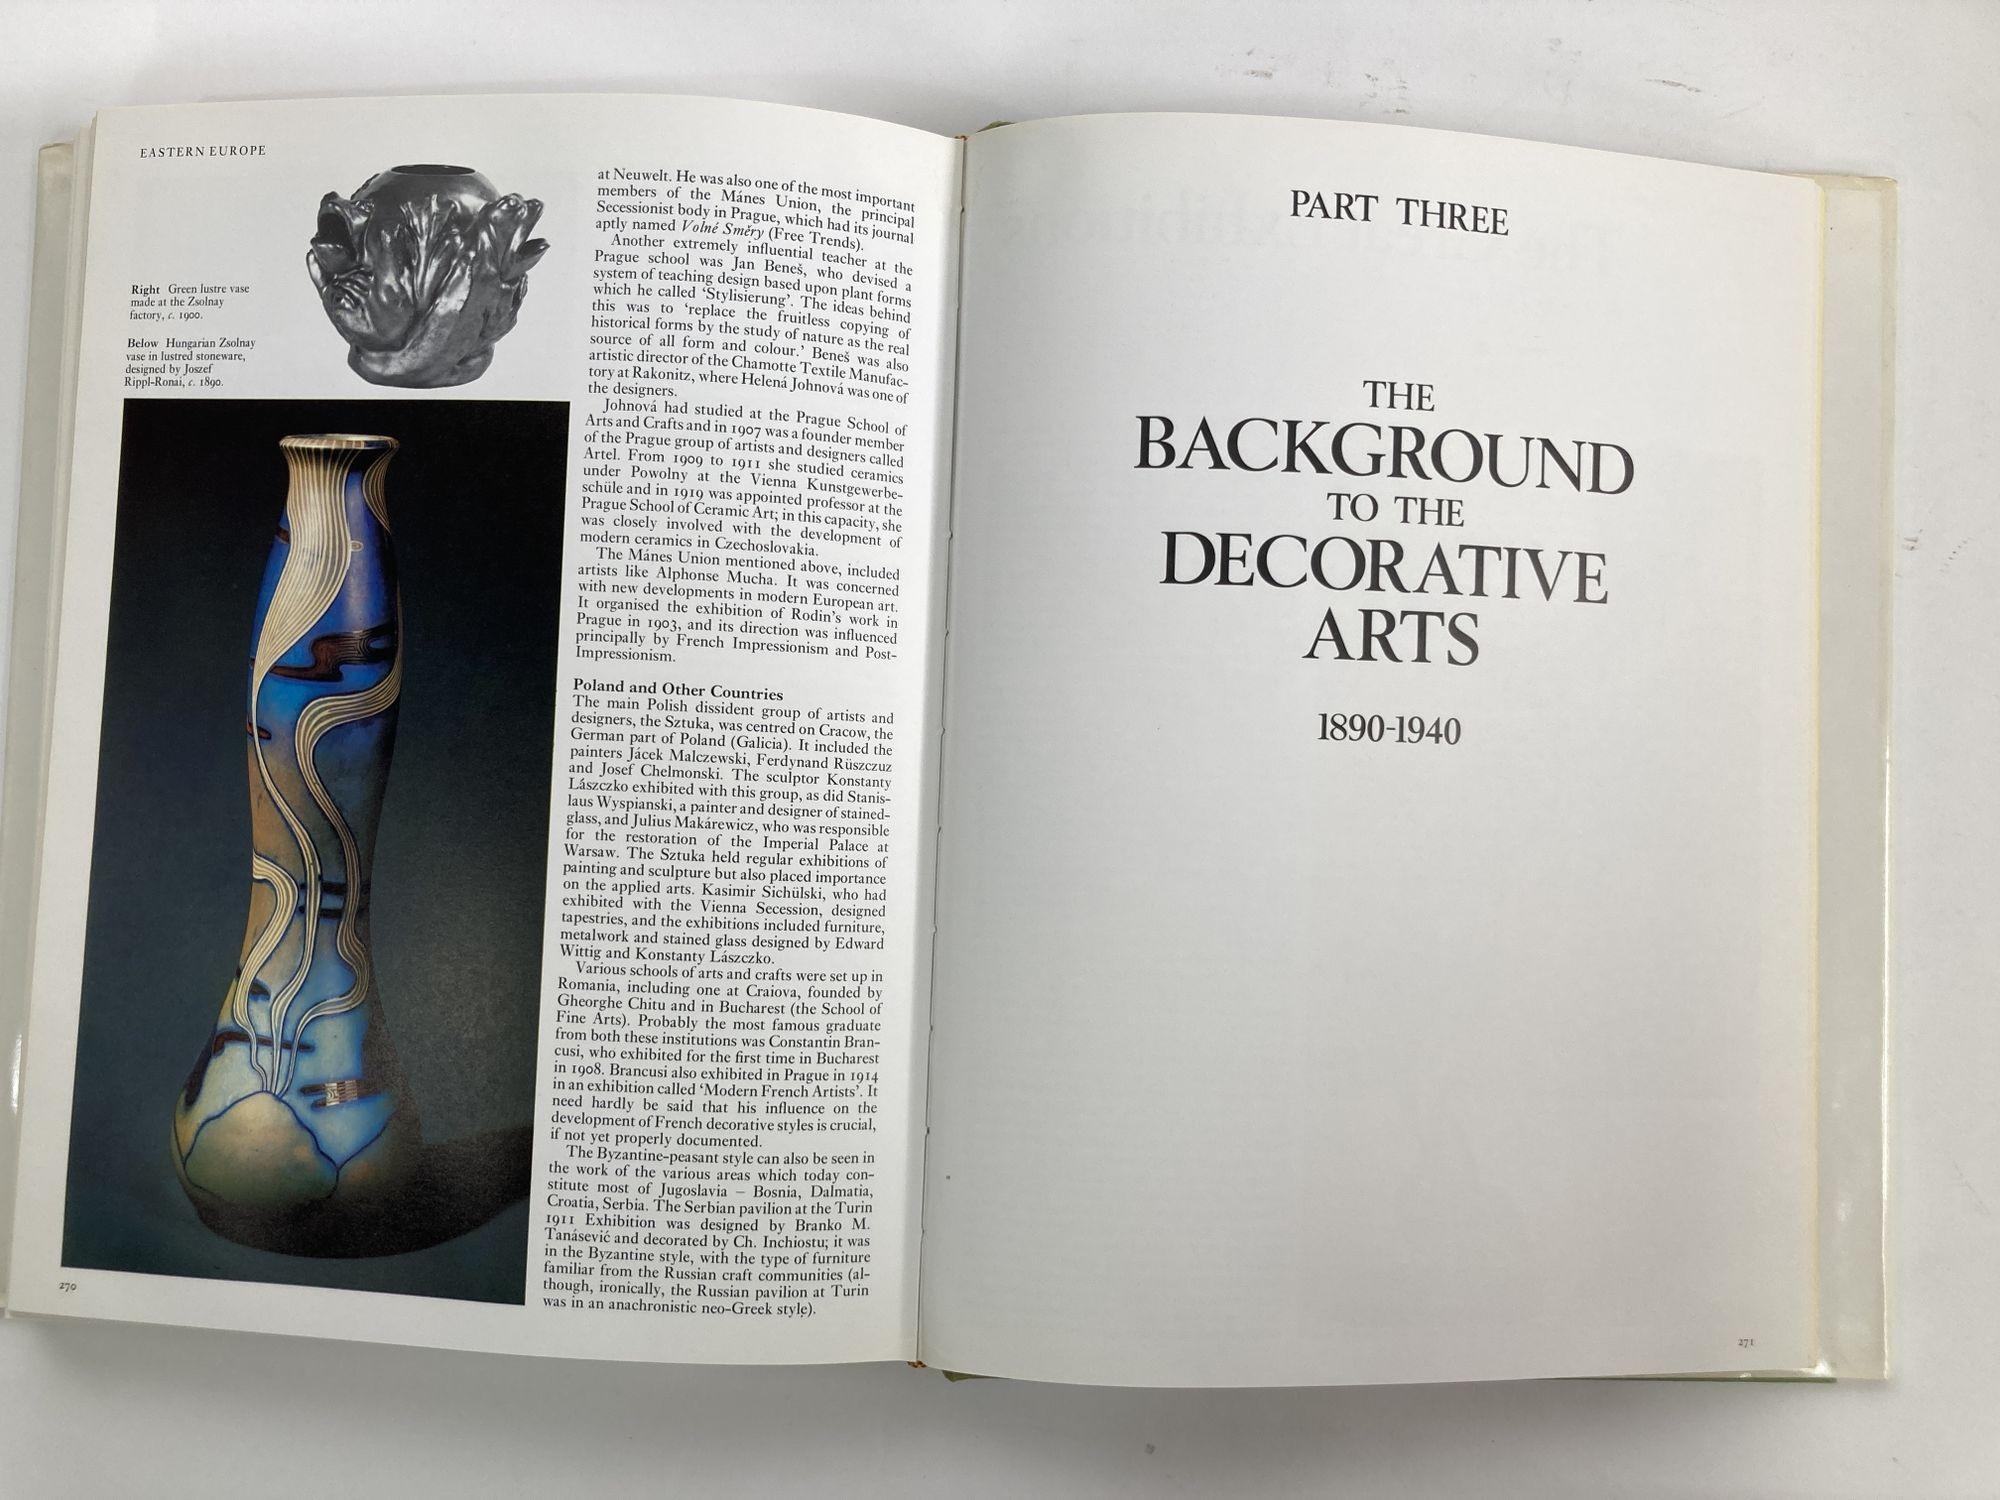 Encyclopedia of Decorative Arts, 1890-1940 1st Edition 1978 For Sale 8